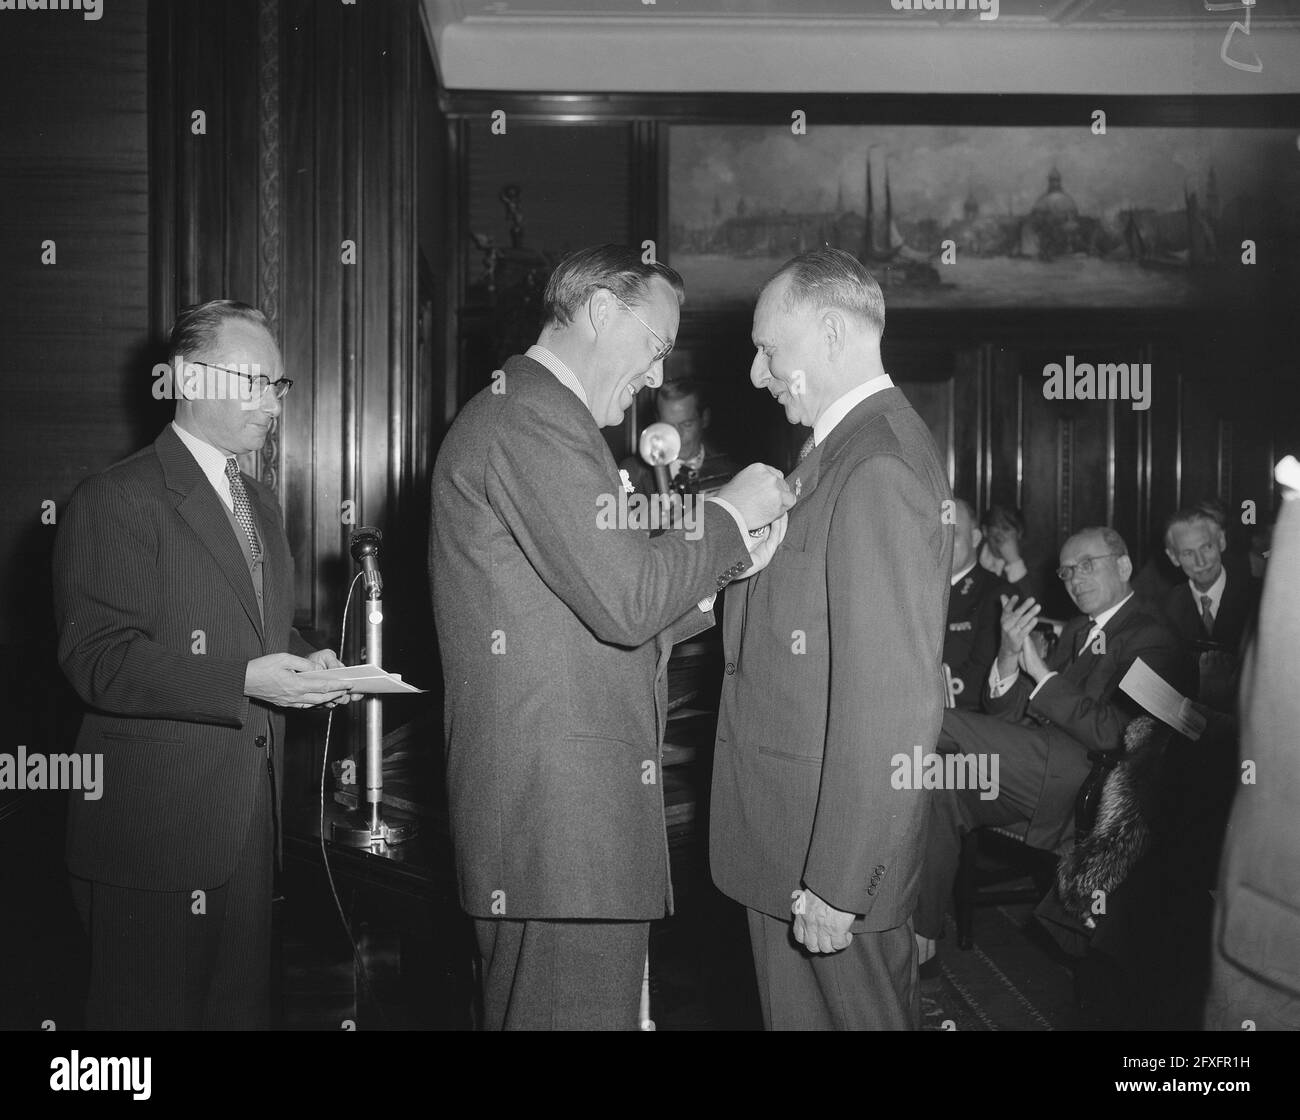 Presentation of Silver Carnations by Prince Bernhard. Frits Lugt (r), June 28, 1956, Presentations, The Netherlands, 20th century press agency photo, news to remember, documentary, historic photography 1945-1990, visual stories, human history of the Twentieth Century, capturing moments in time Stock Photo